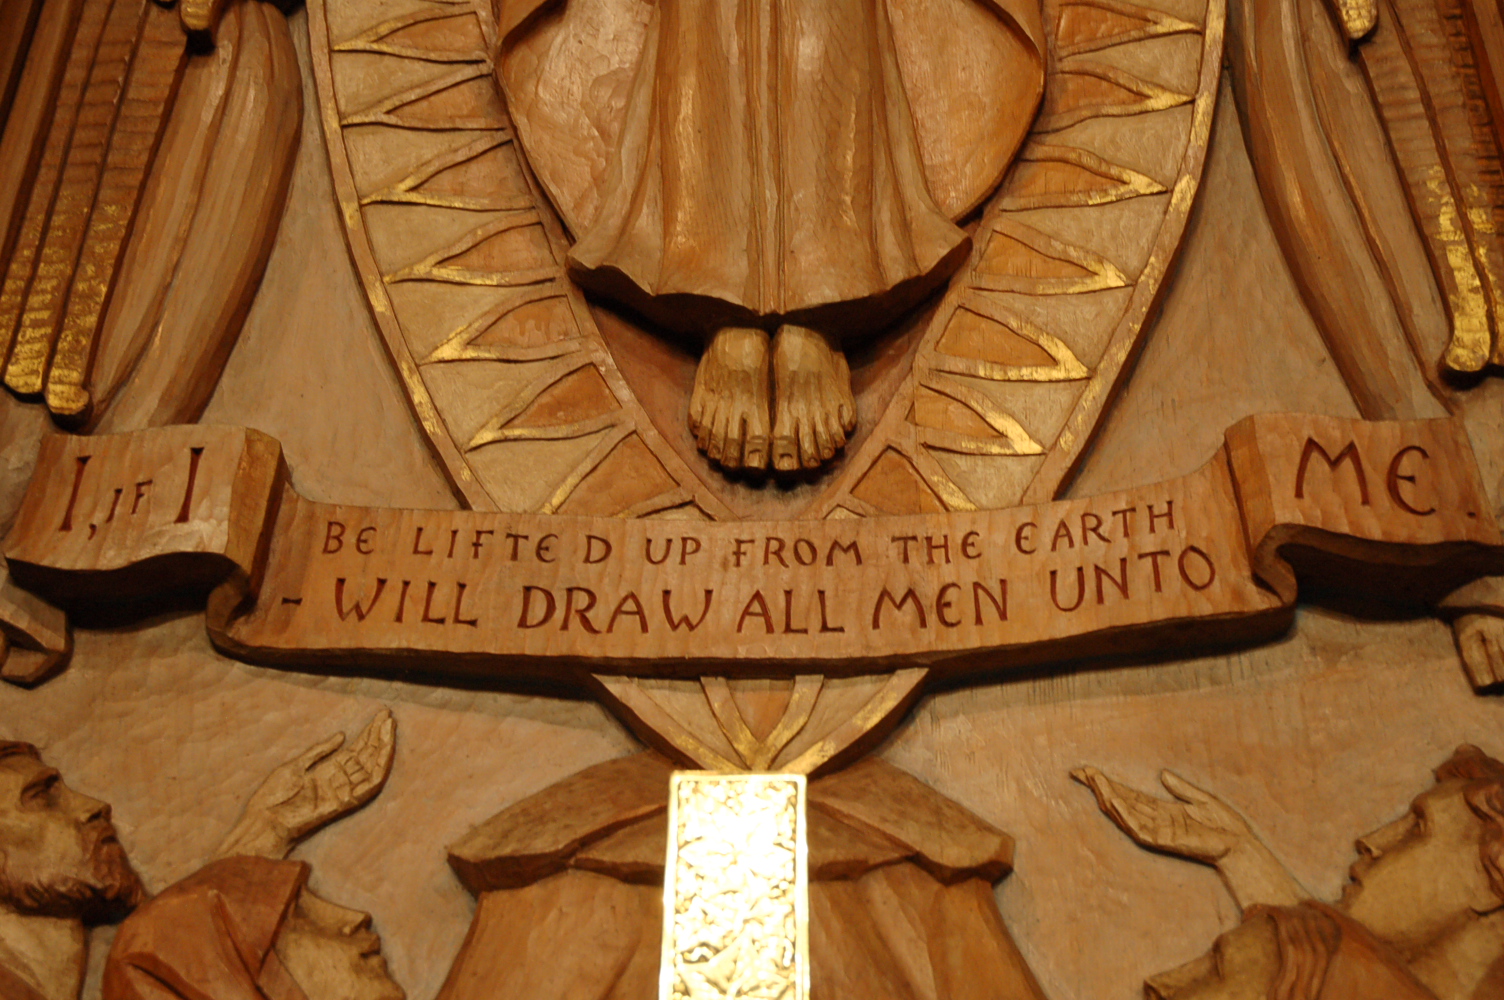 center of carved wood reredos above altar: the feet of Jesus with words "I, if I be lifted up from the earth, will draw all men unto Me."